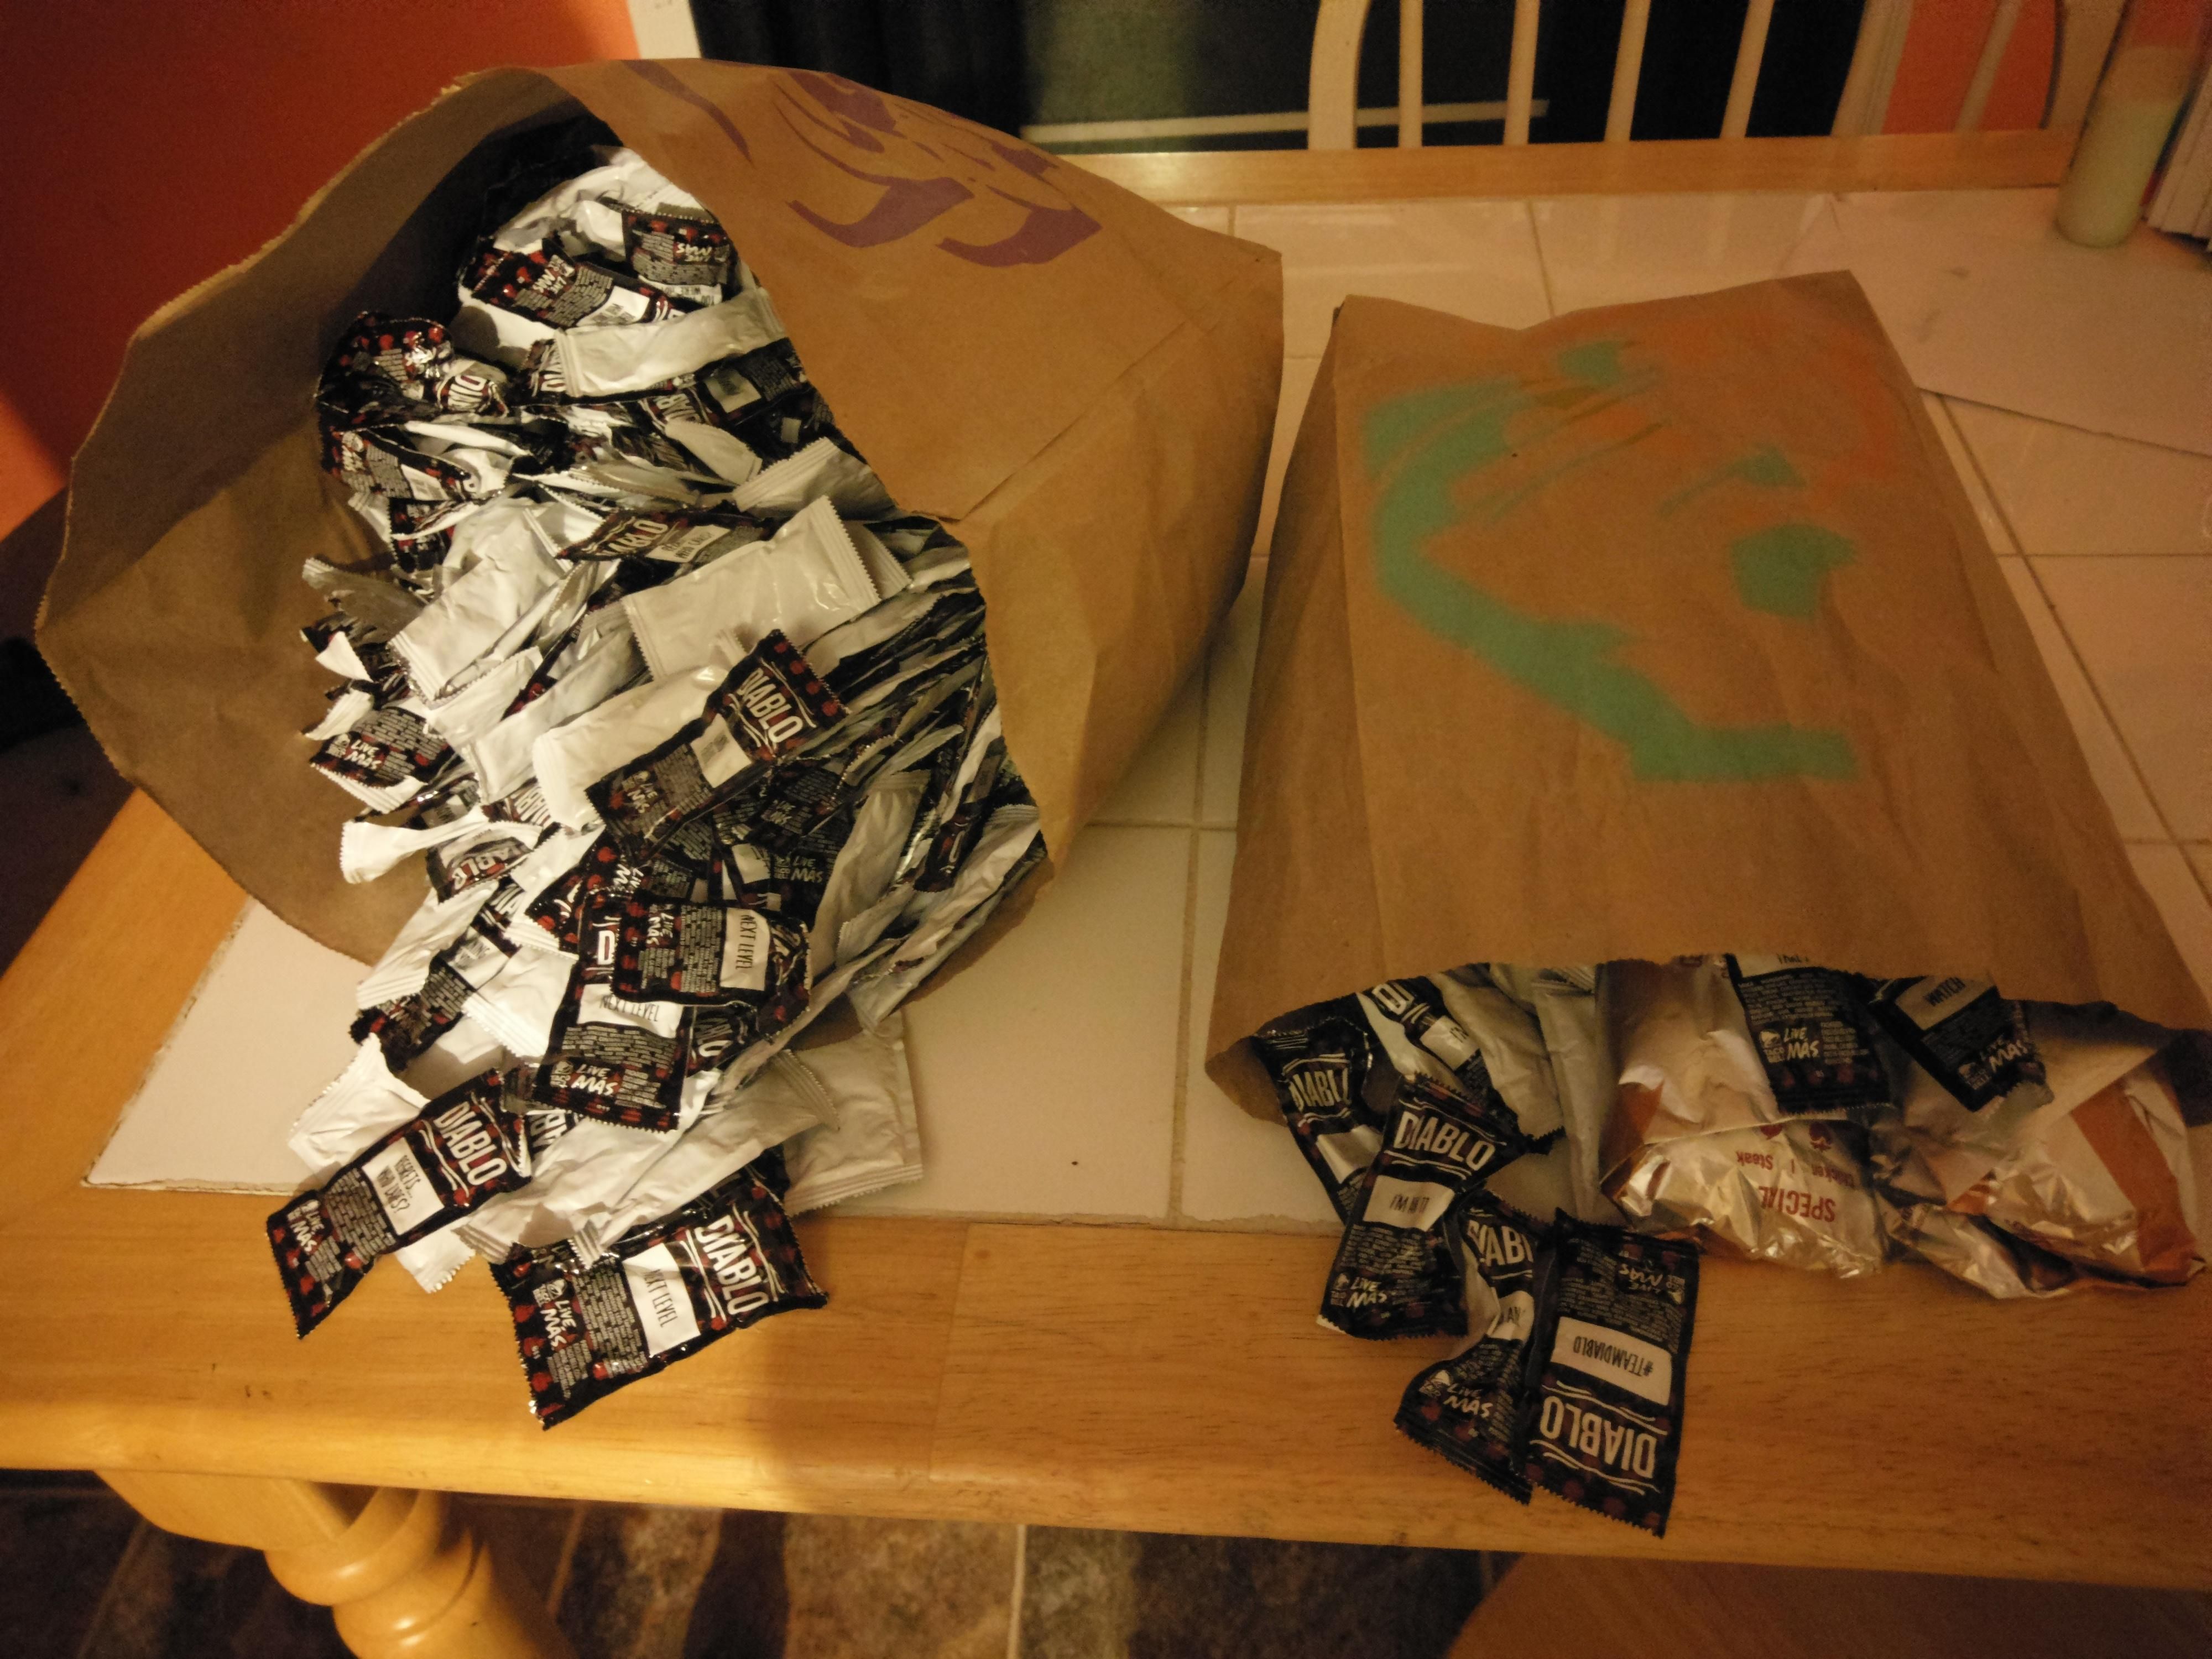 Went through the taco bell drive-thru with a friend. When asked if we wanted sauce, I said: "As much as you're allowed to give me." I may have made a mistake.